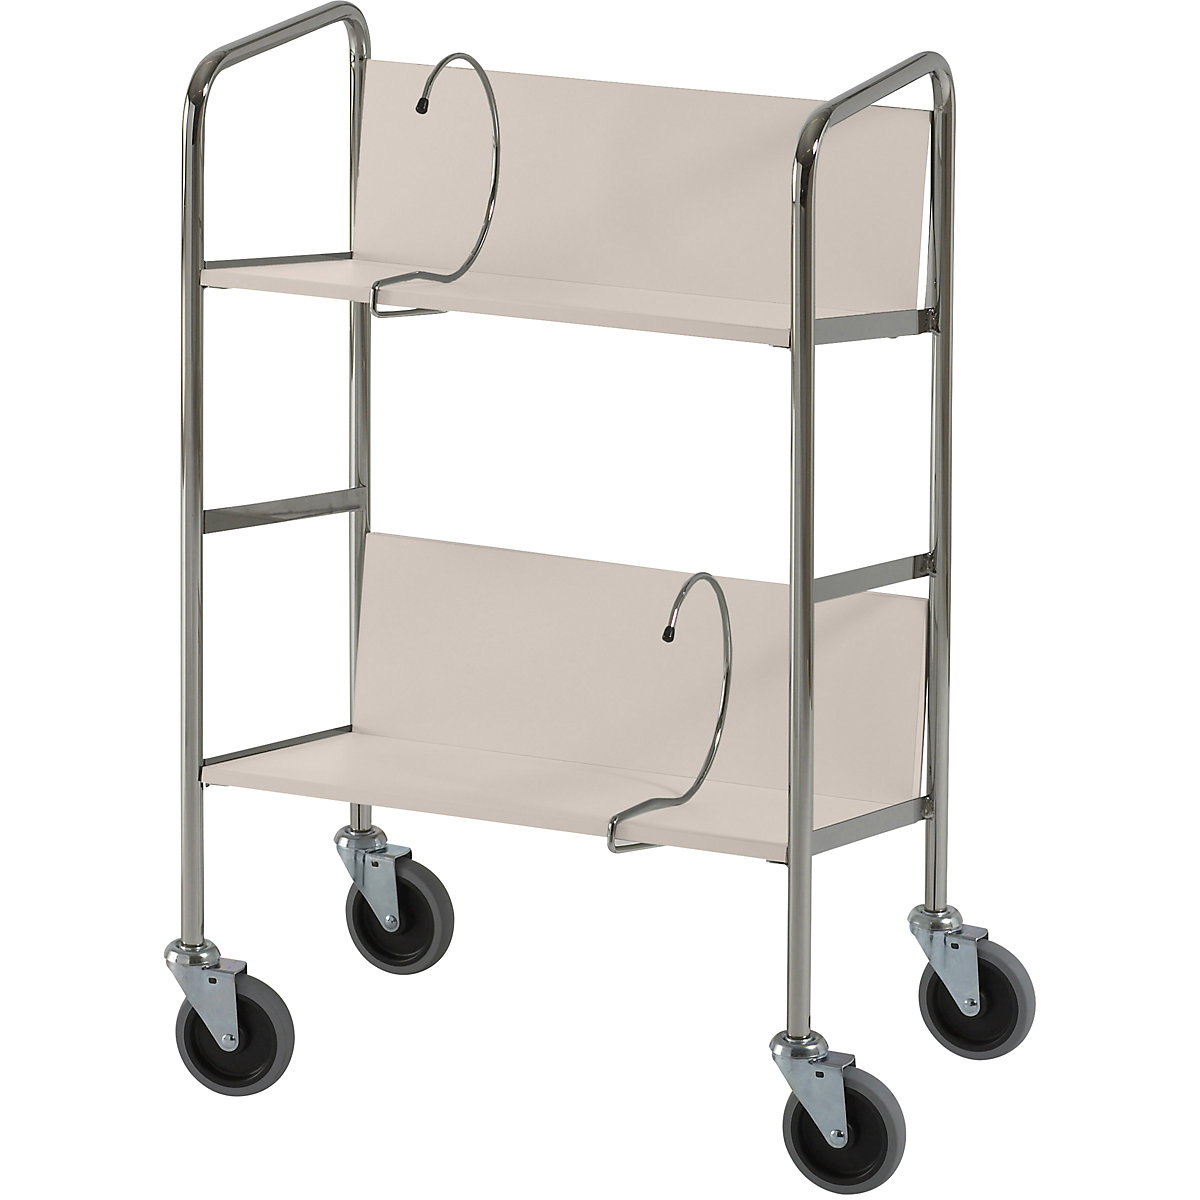 File trolley, chrome plated – HelgeNyberg, 2 shelves, LxWxH 550 x 340 x 840 mm, birch finish, 5+ items-16